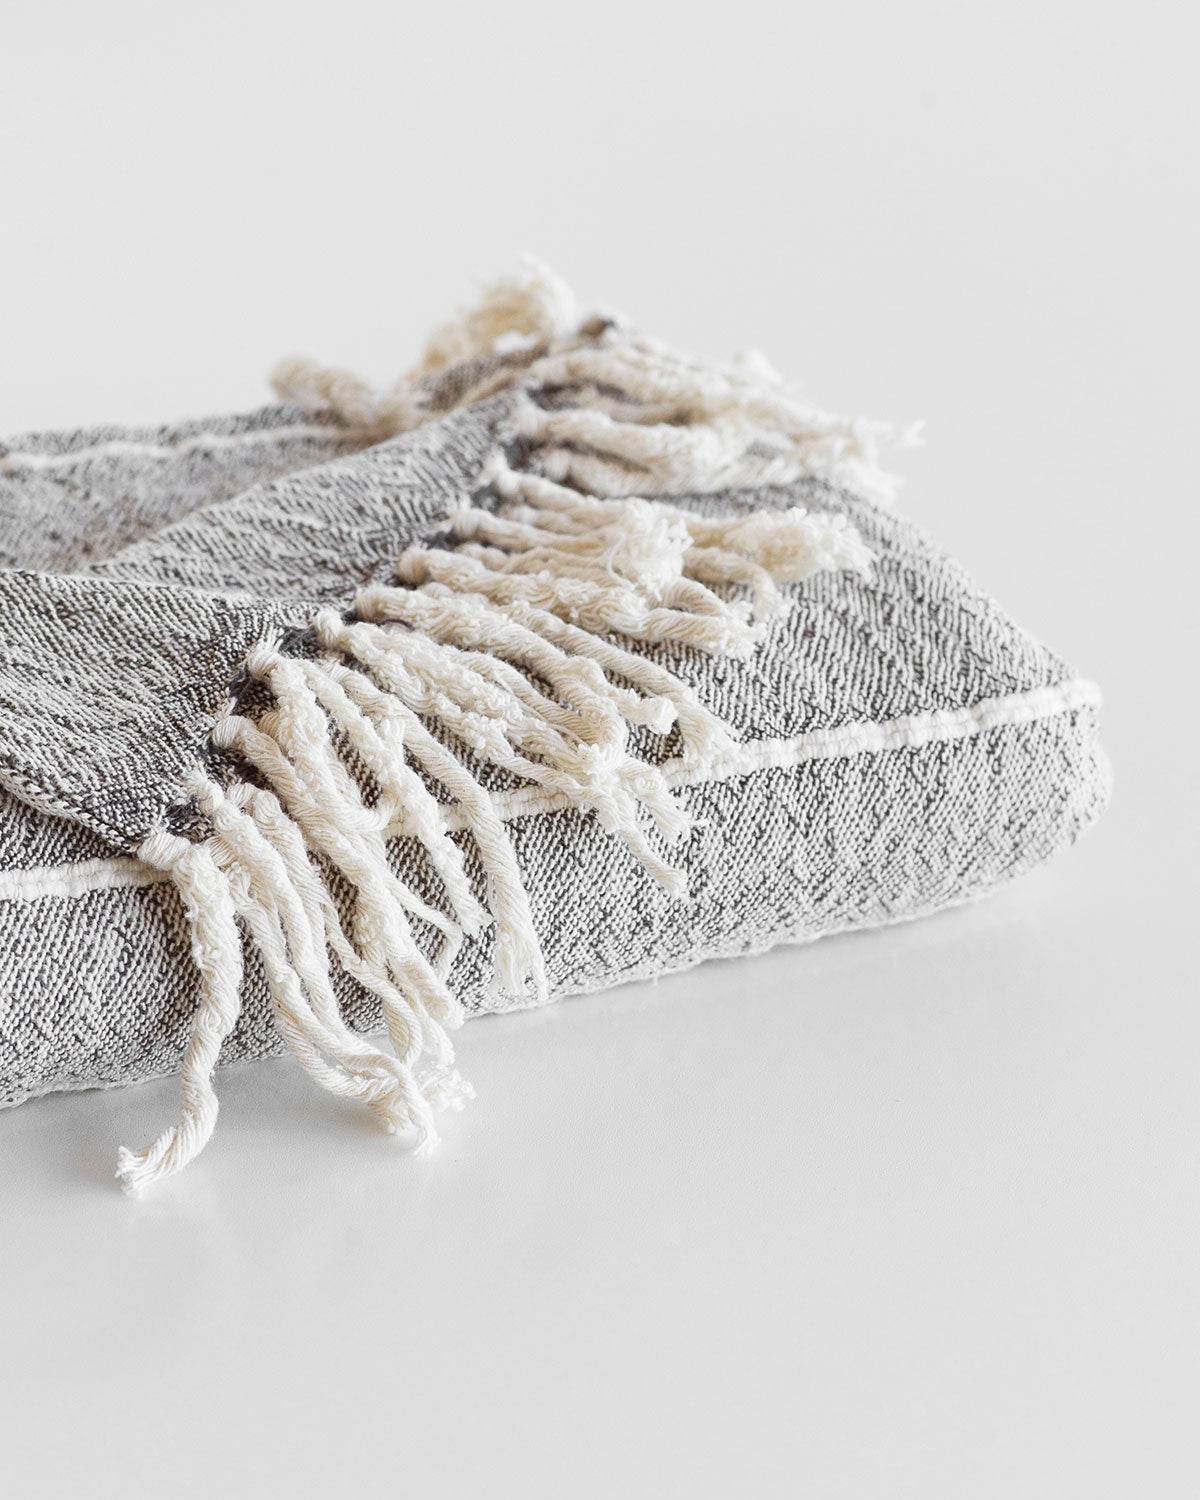 Throws_Handwoven_Cotton_Tassles_Charcoal